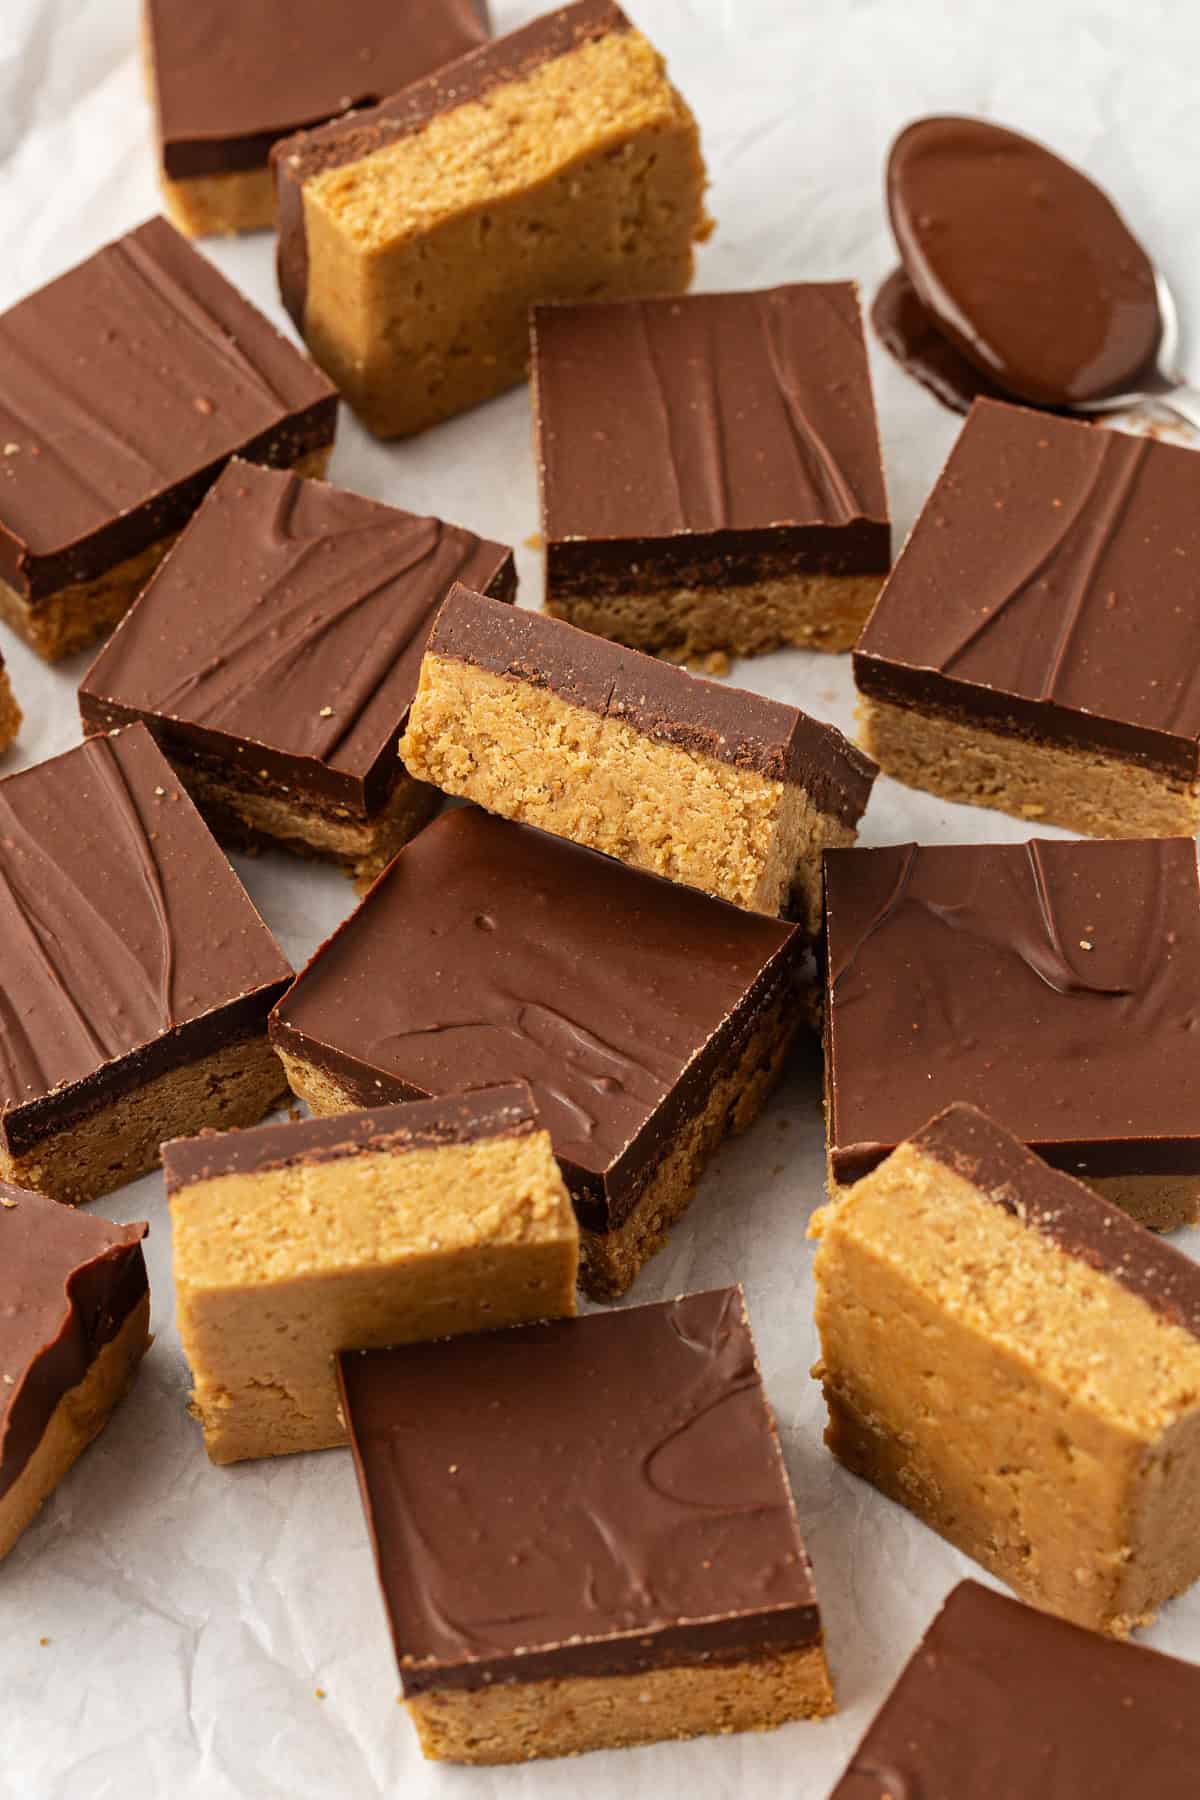 peanut butter bars scattered around on white parchment paper, some on their sides, some flat, some leaning on others, and one spoon of melted chocolate beside them